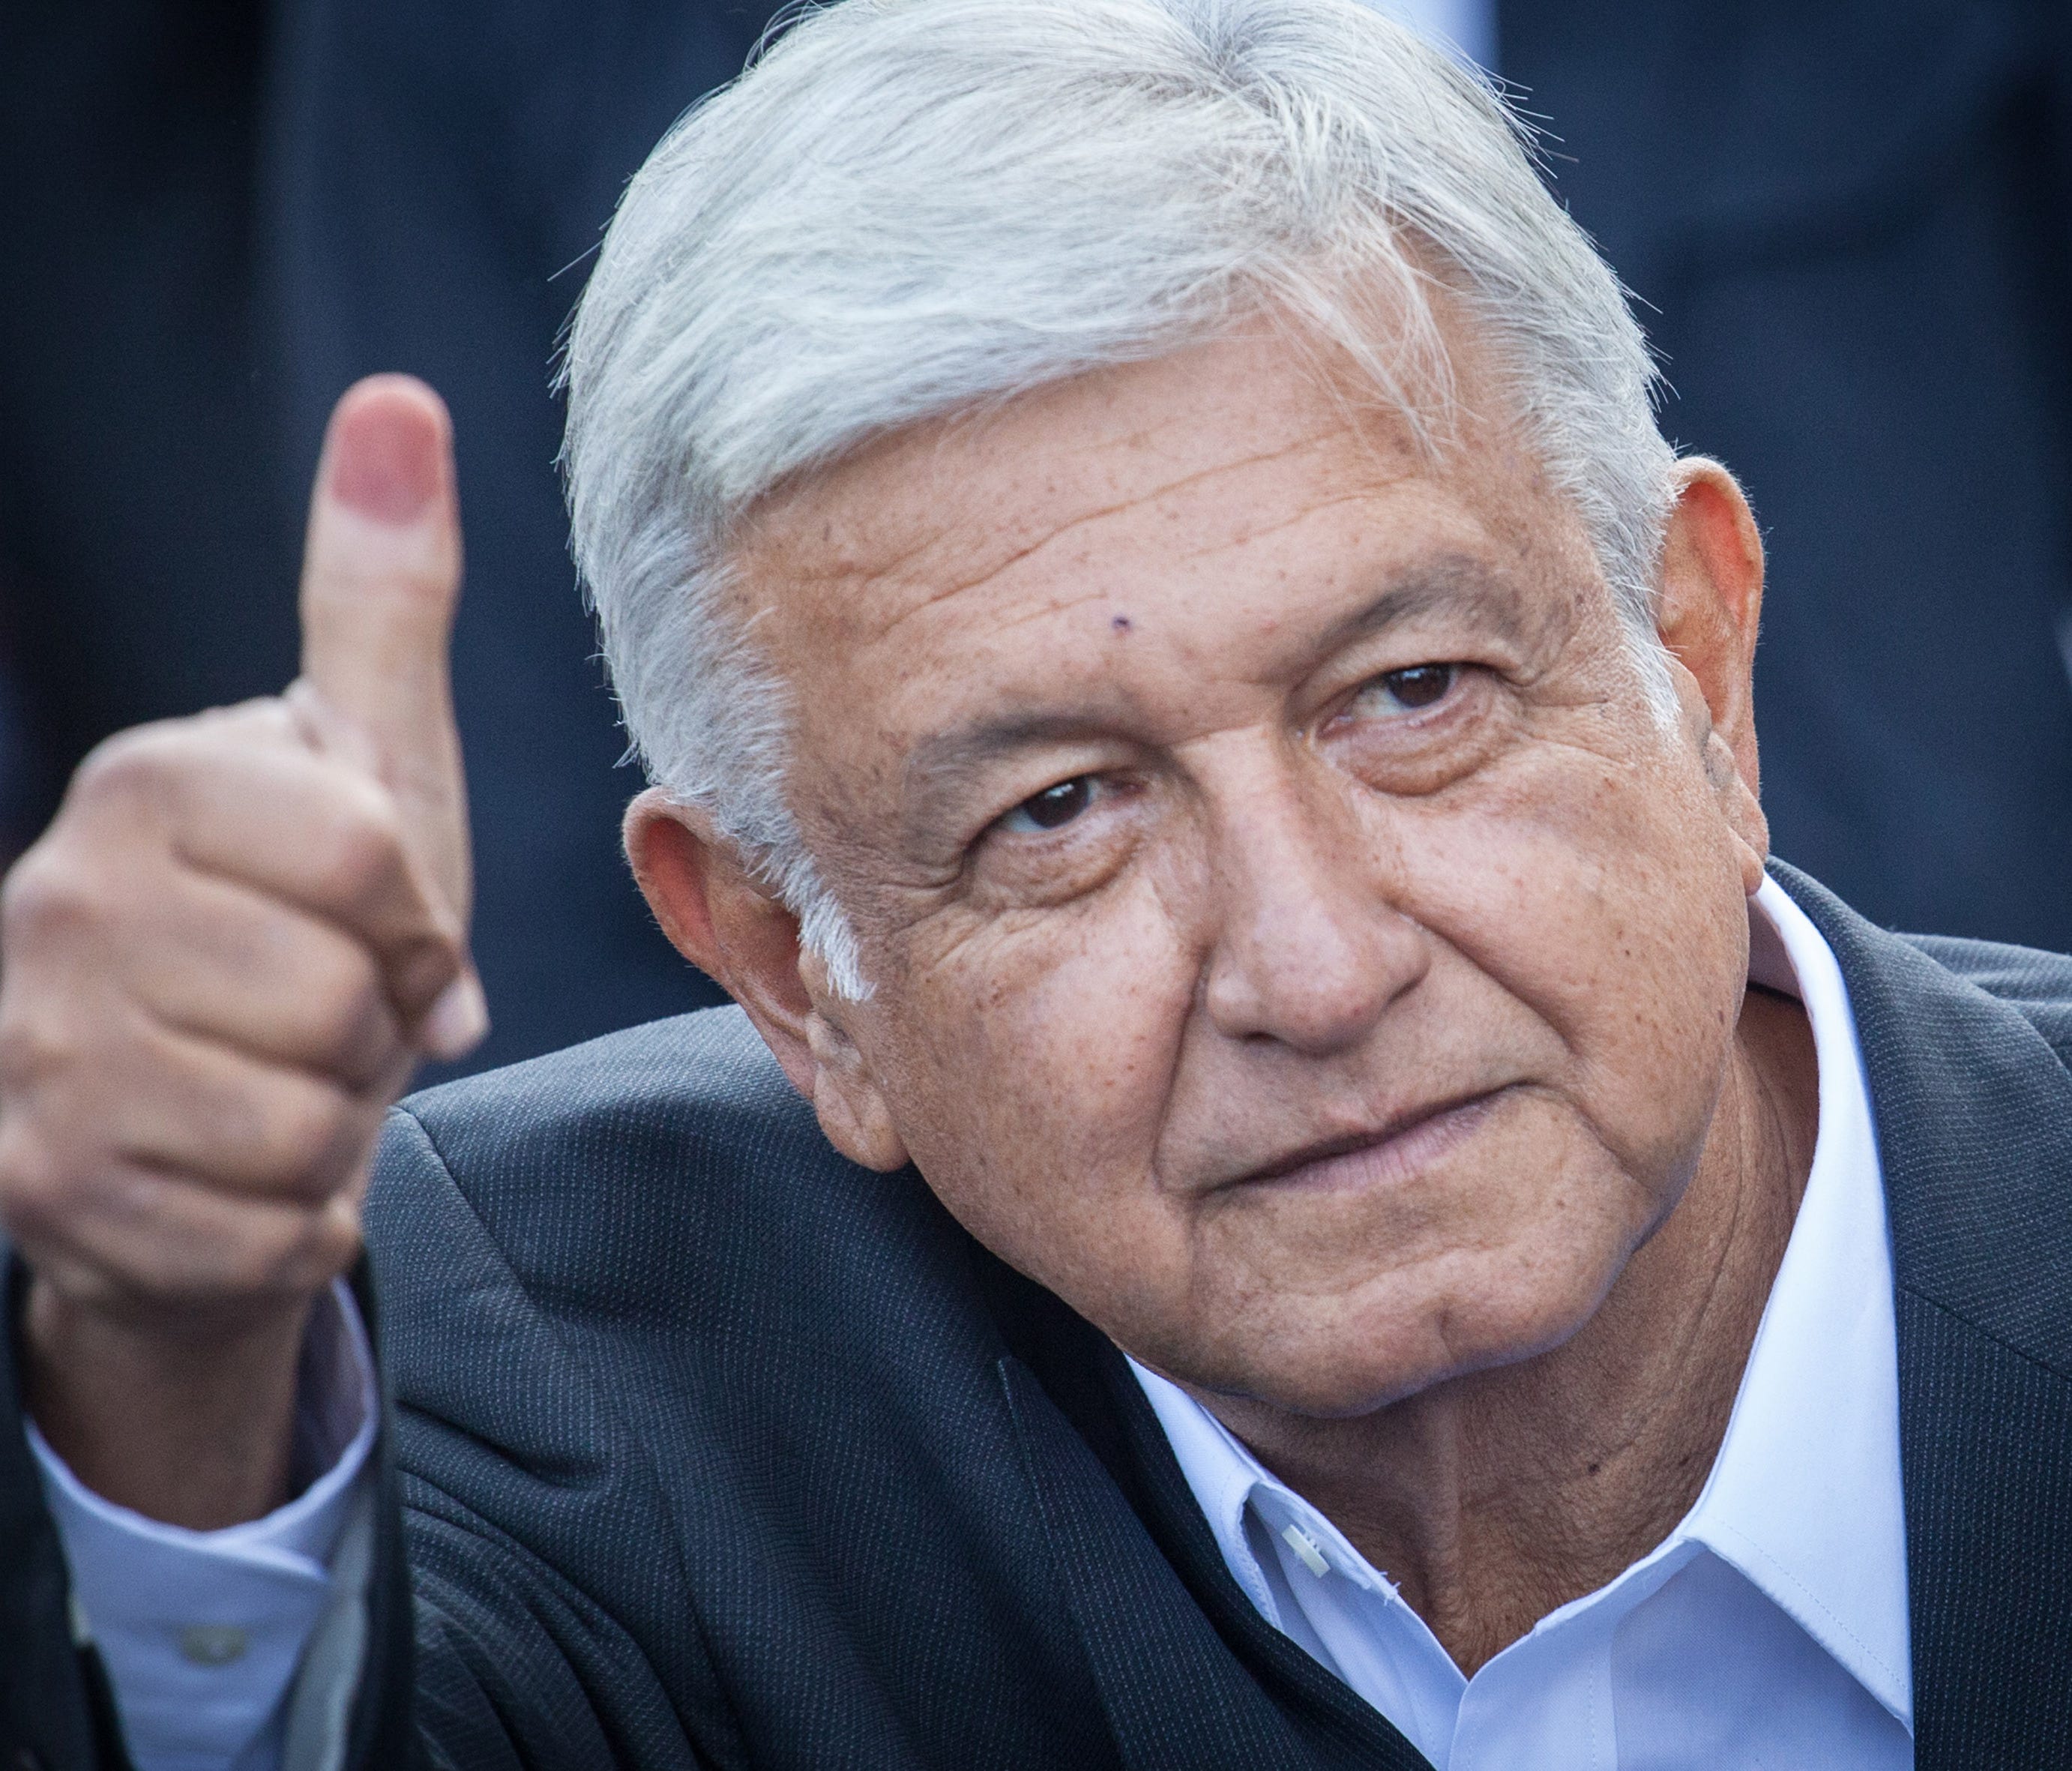 Presidential candidate Andres Manuel Lopez Obrador waves after voting in Mexico's presidential election on July 1, 2018, in Mexico City.